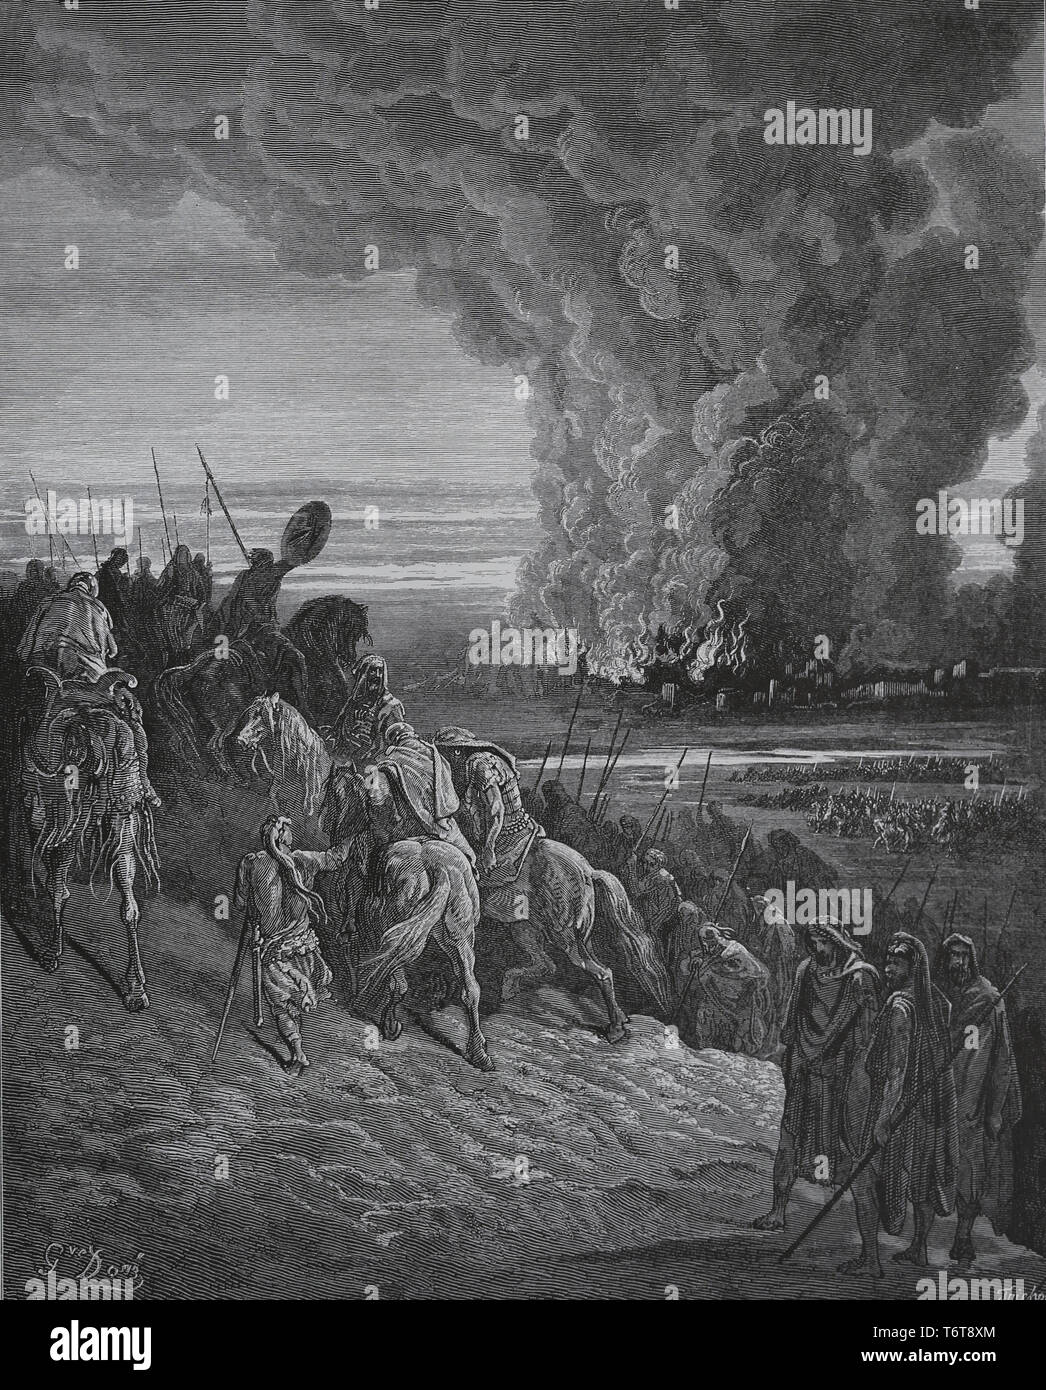 Bible. Book of Joshua. Joshua burns the Town of Ai. Conquest of Canaan. Engraving by Gustave Dore, 1866 Stock Photo